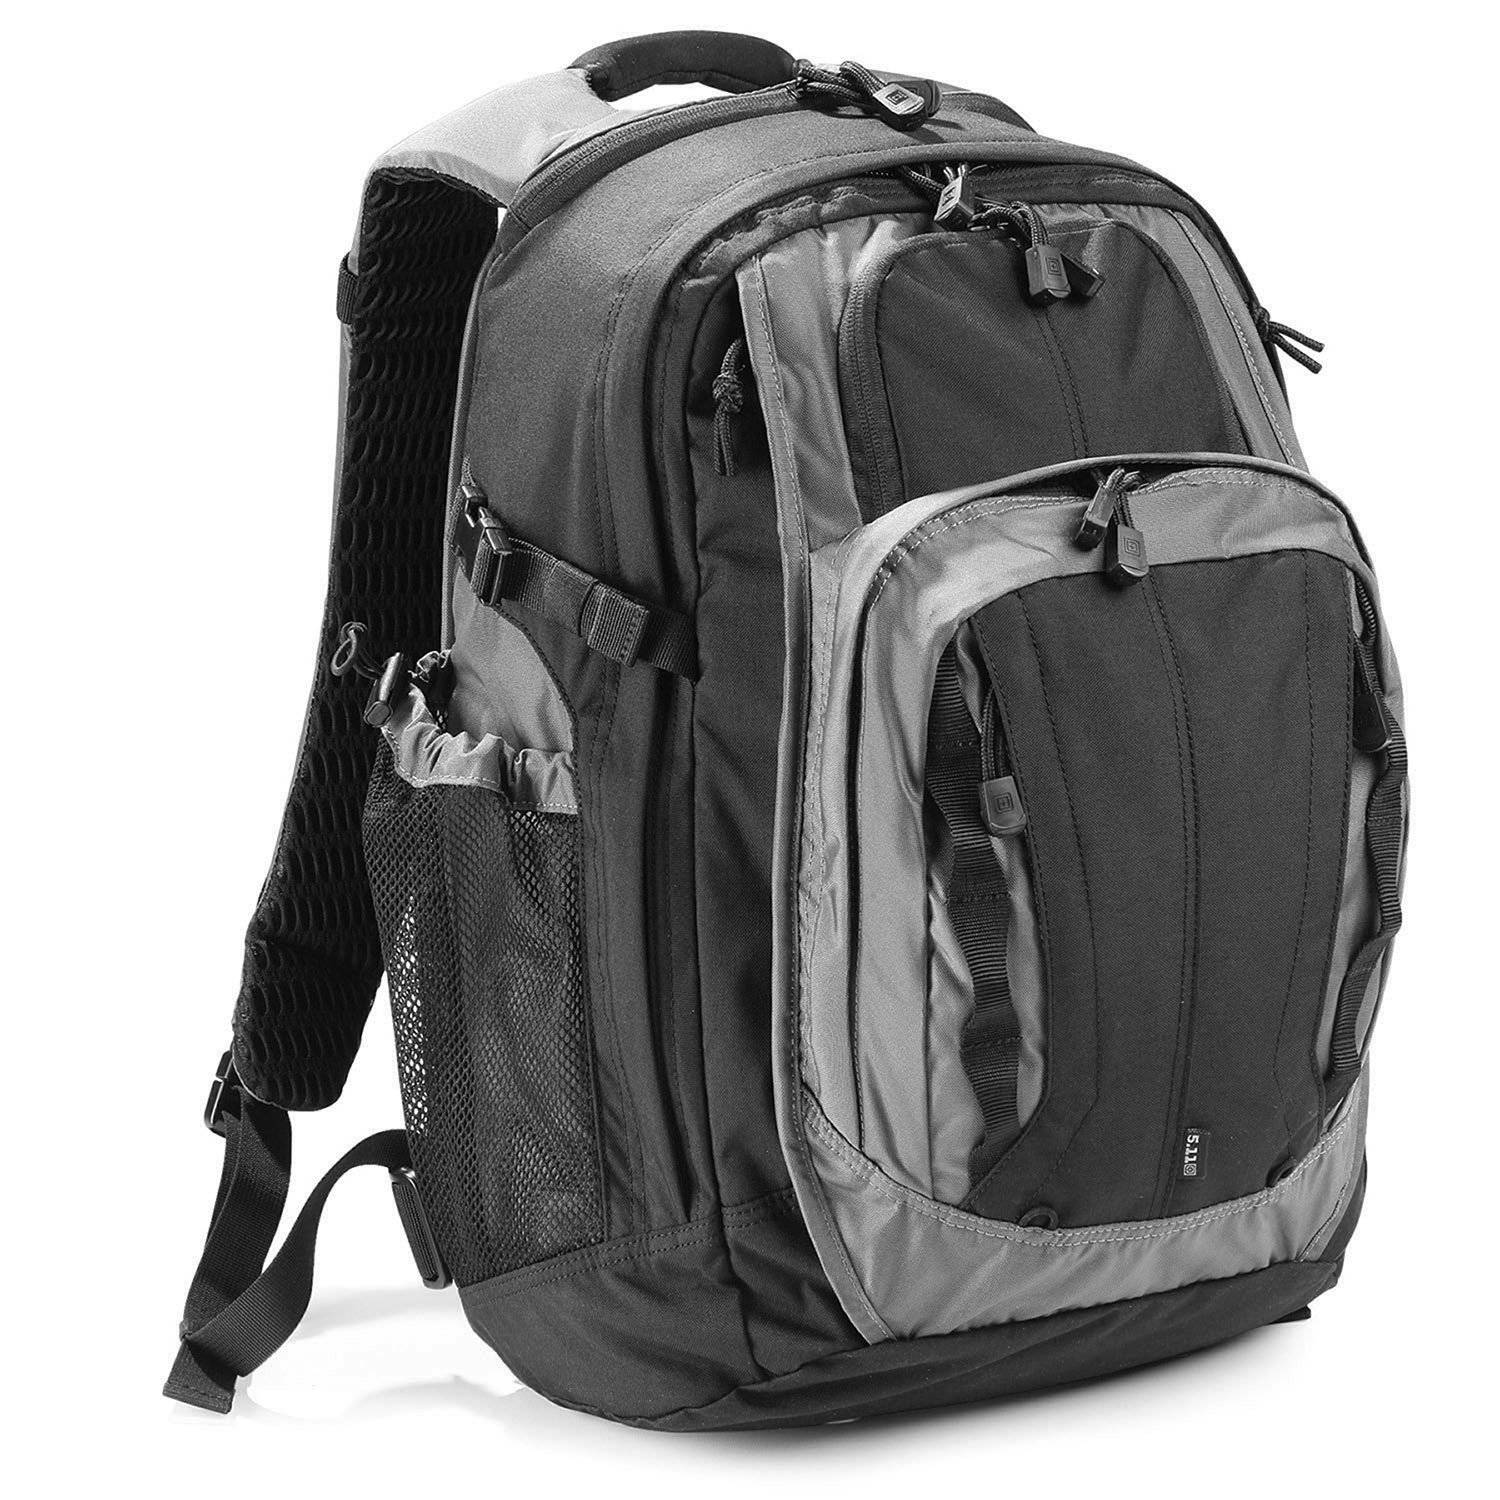 5.11 TACTICAL COVRT 18 TACTICAL BACKPACK